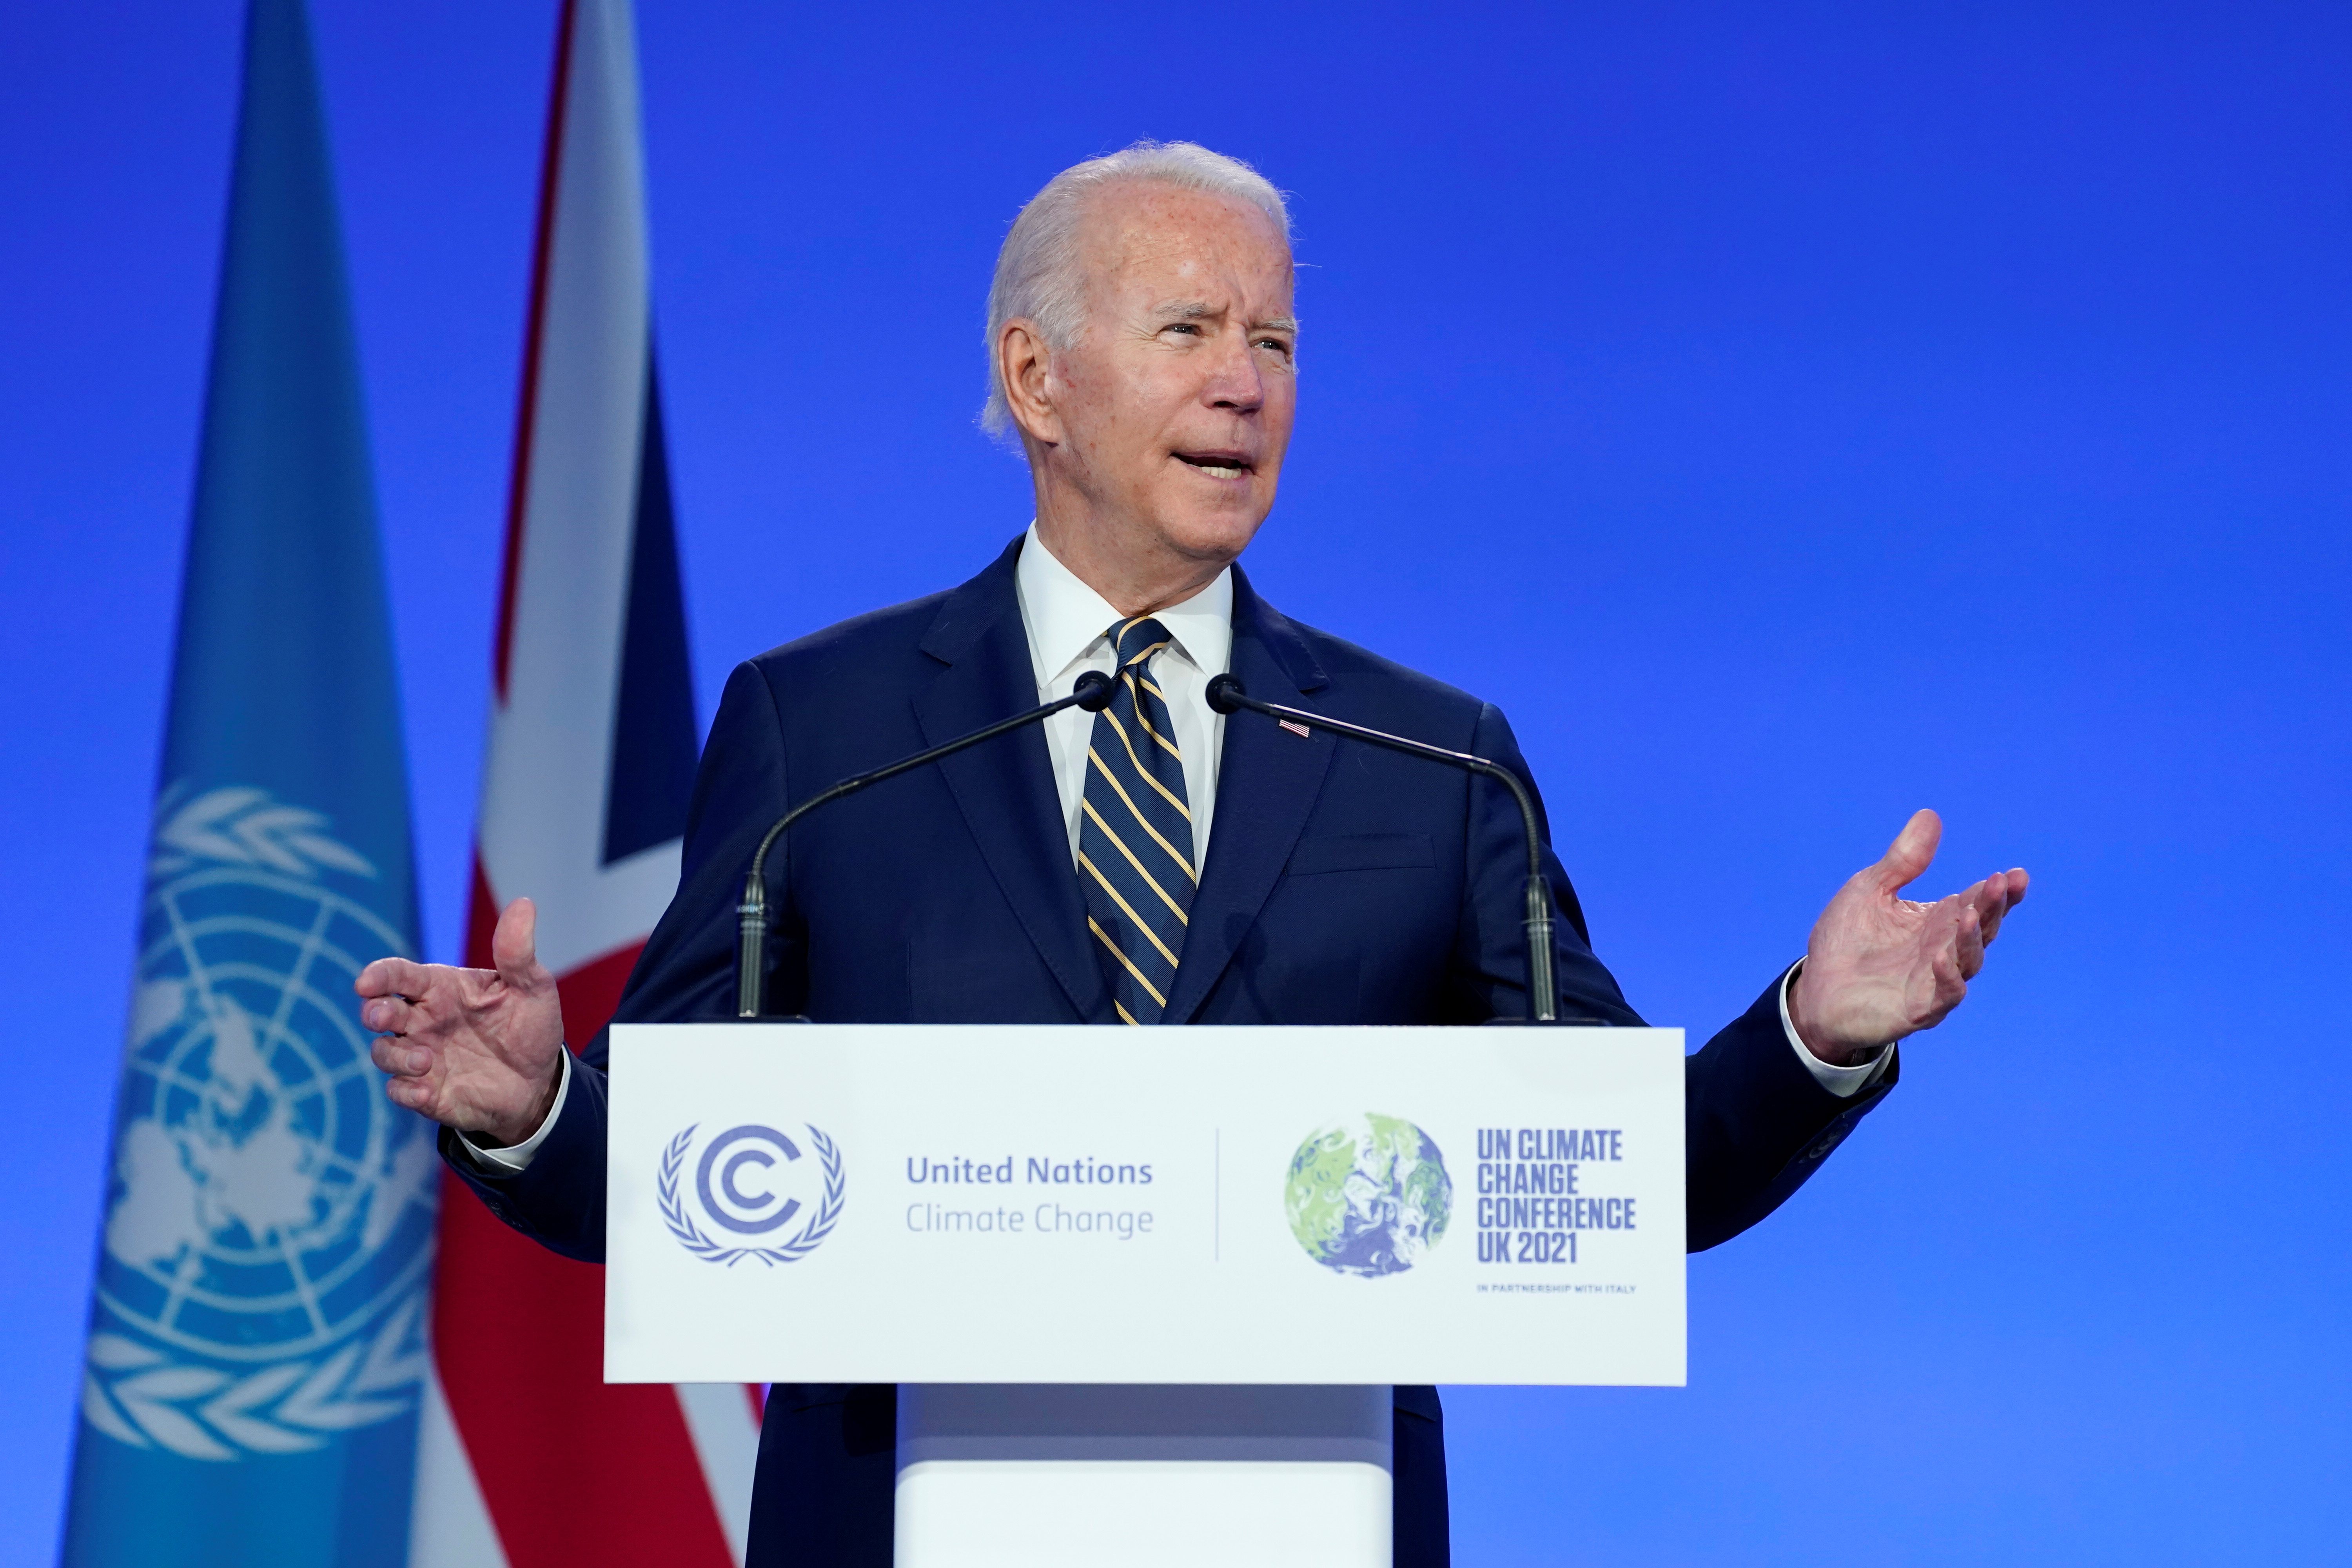 Biden says US will meet its climate goals, urges help for developing nations